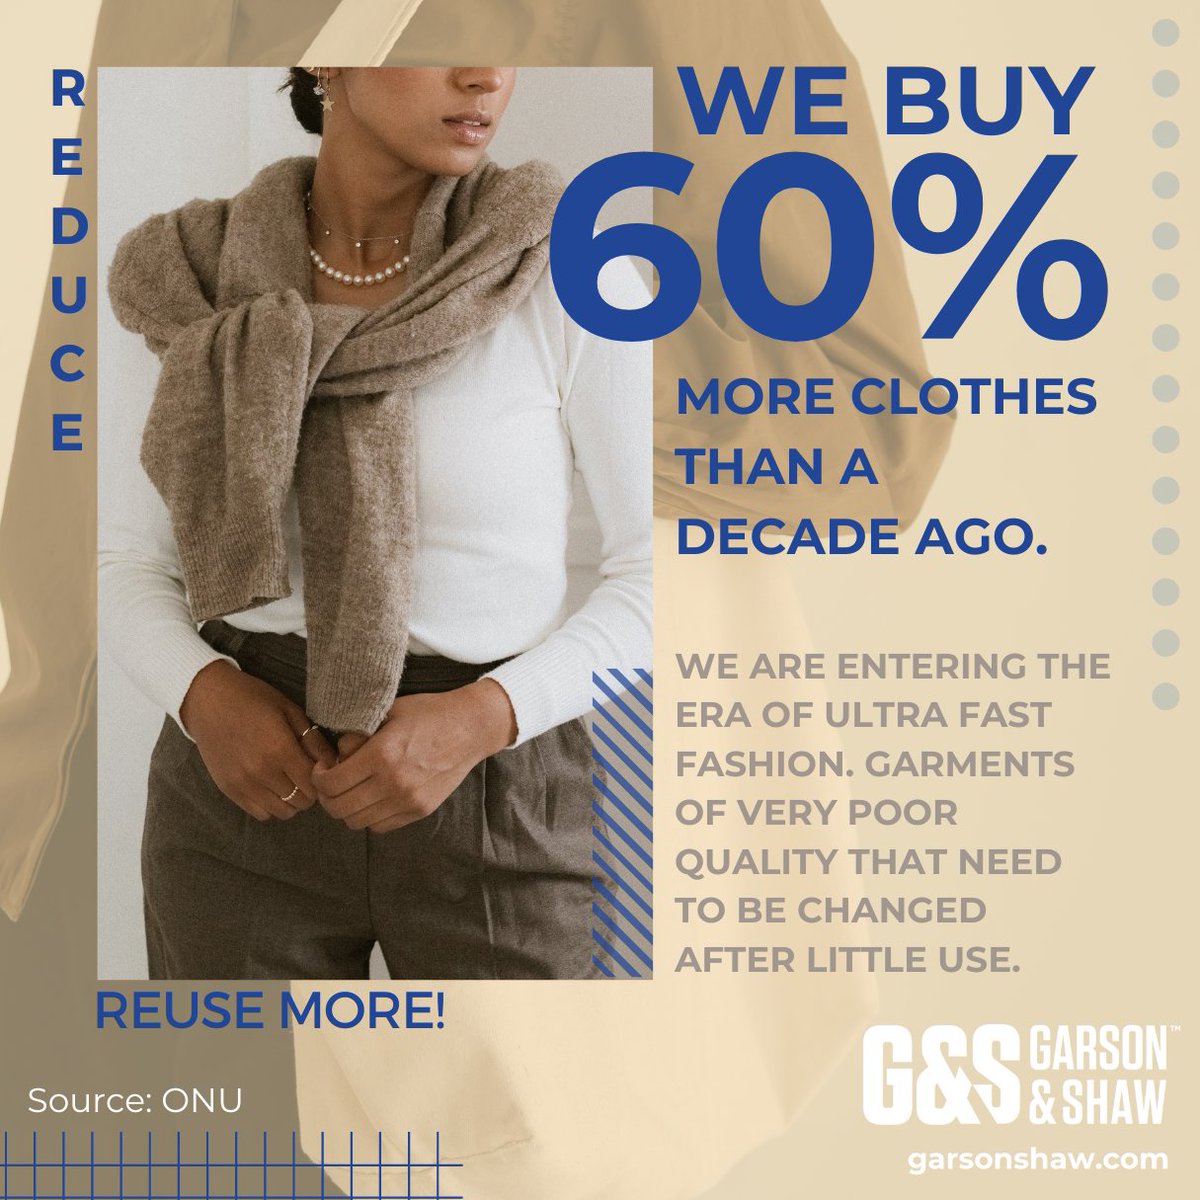 👀👗Ultra-Fast Fashion:  faster production cycles and poor labour practices, increased negative environmental impacts👎.
#Reuse #SayNOToFastFashion #ReduceConsumption #GarsonShaw